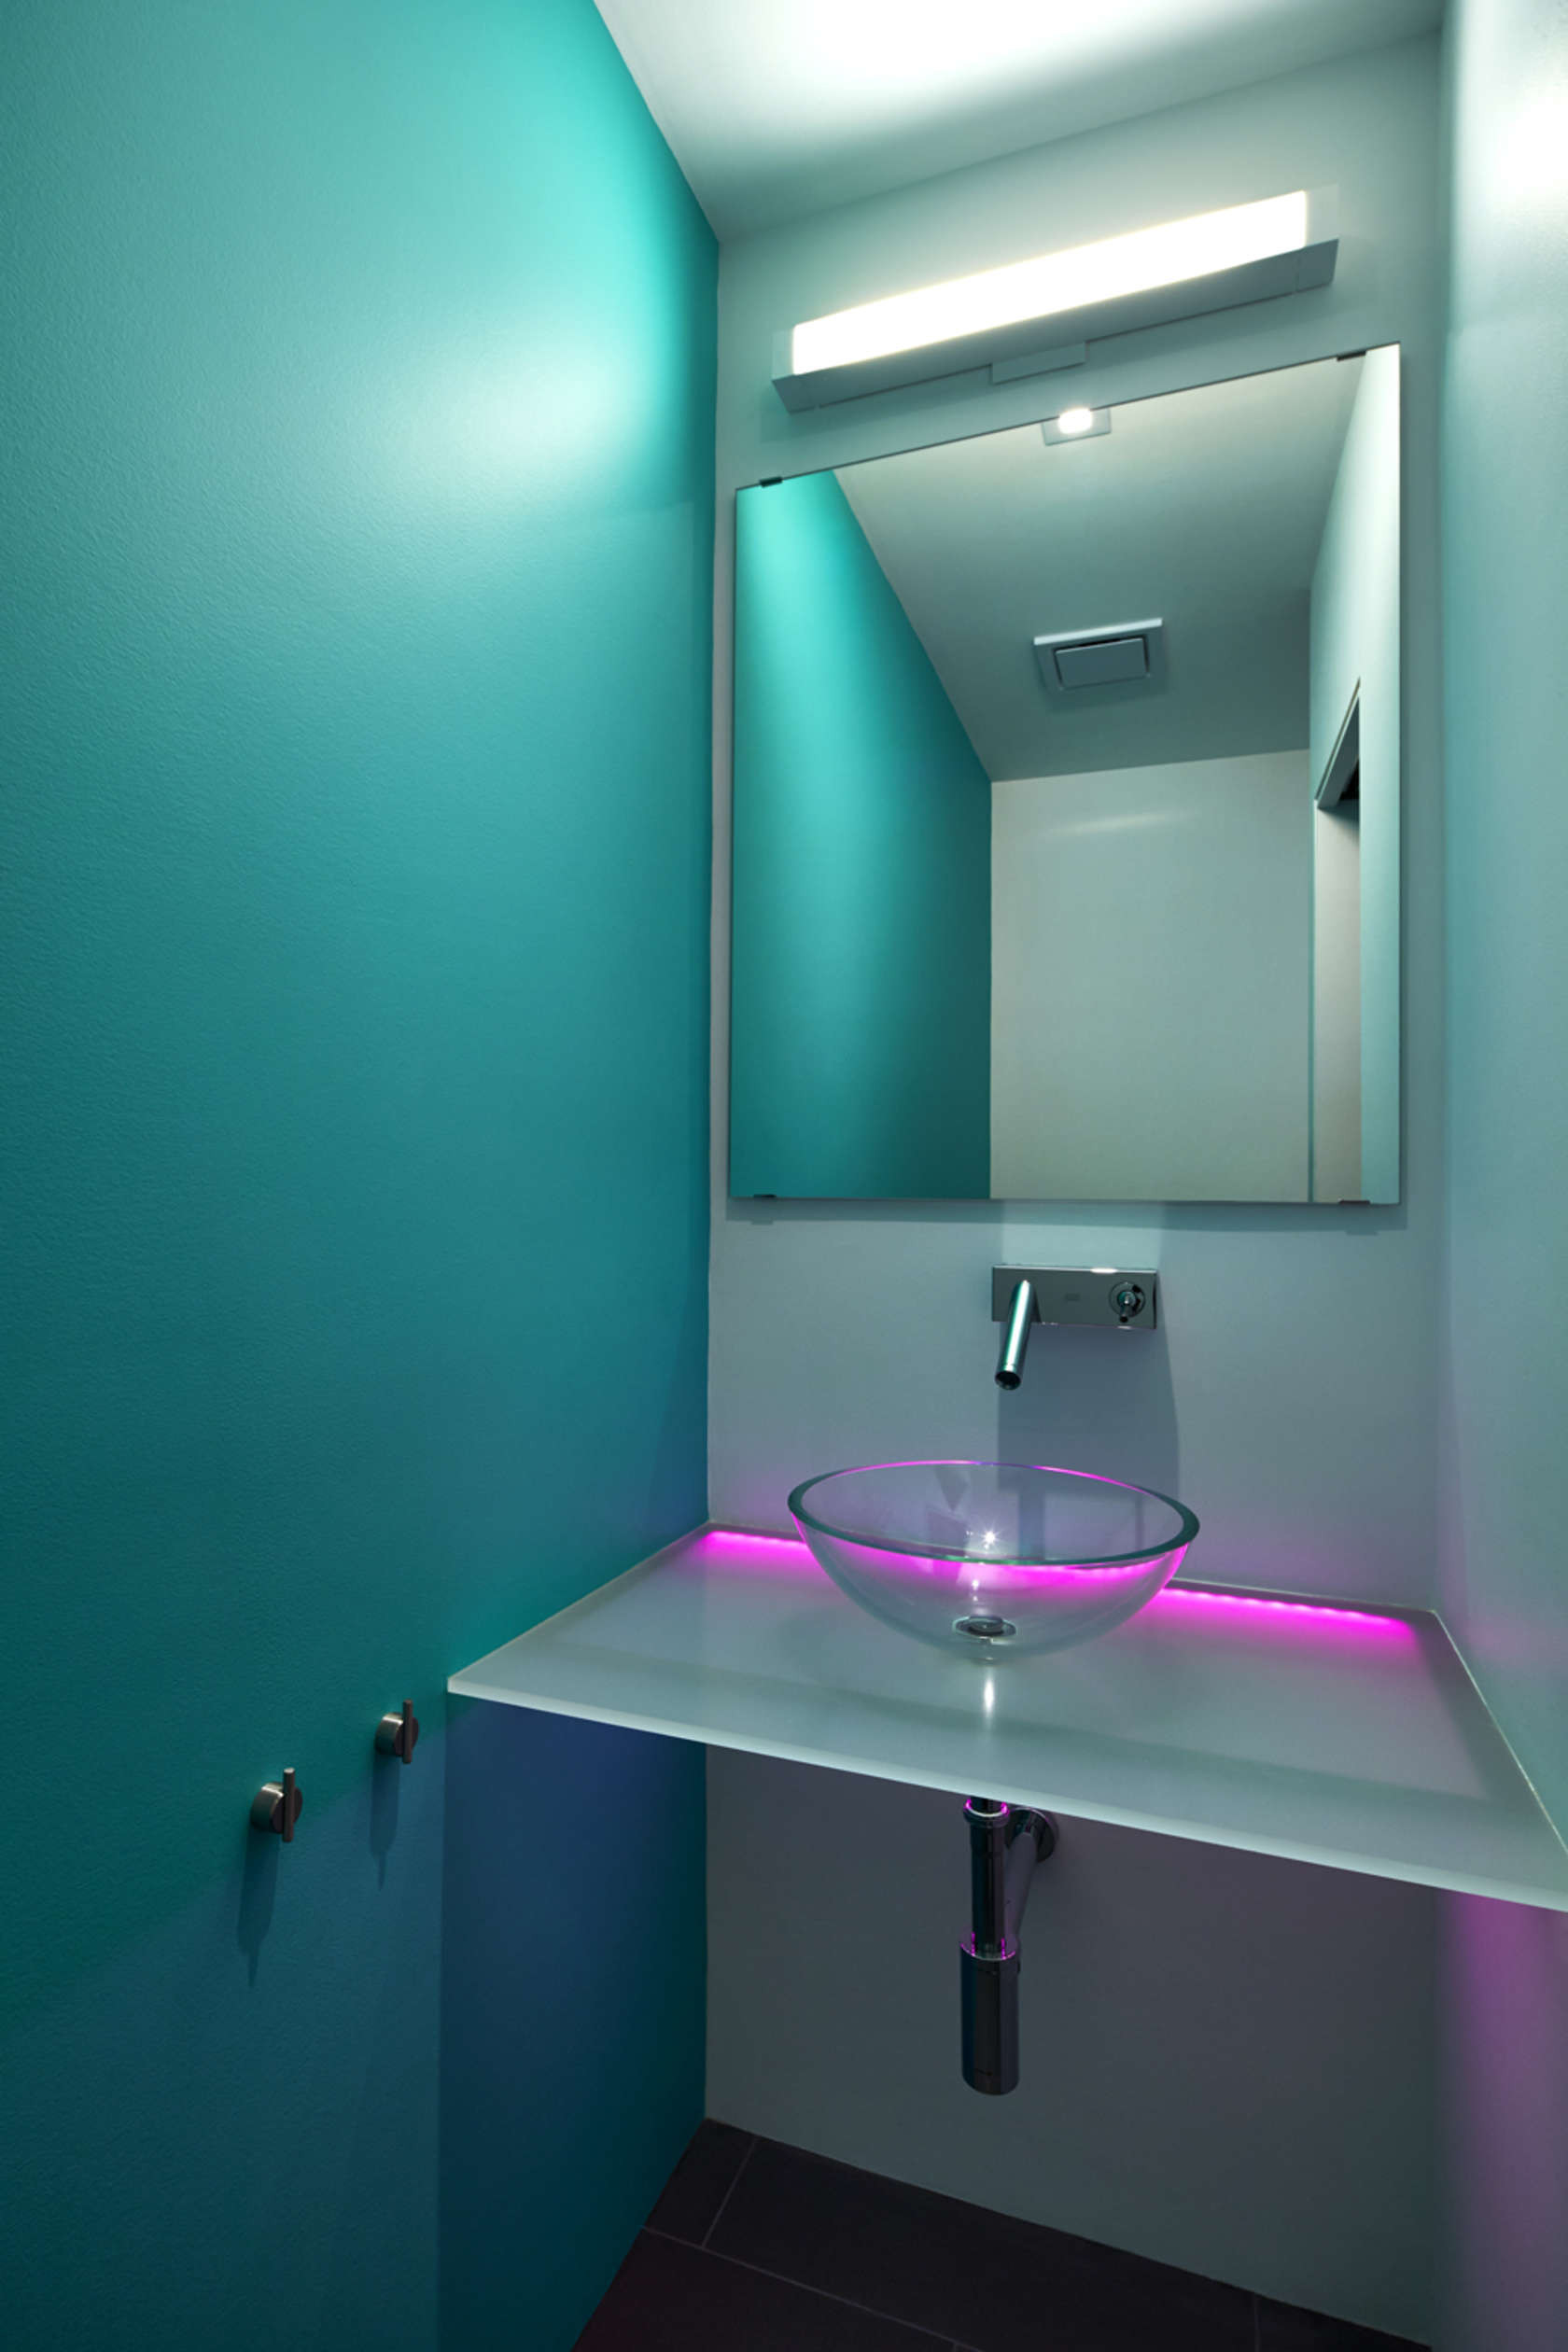 Led Bathroom Lighting
 A Modern Row House for a Fun Couple with a Love of Cooking